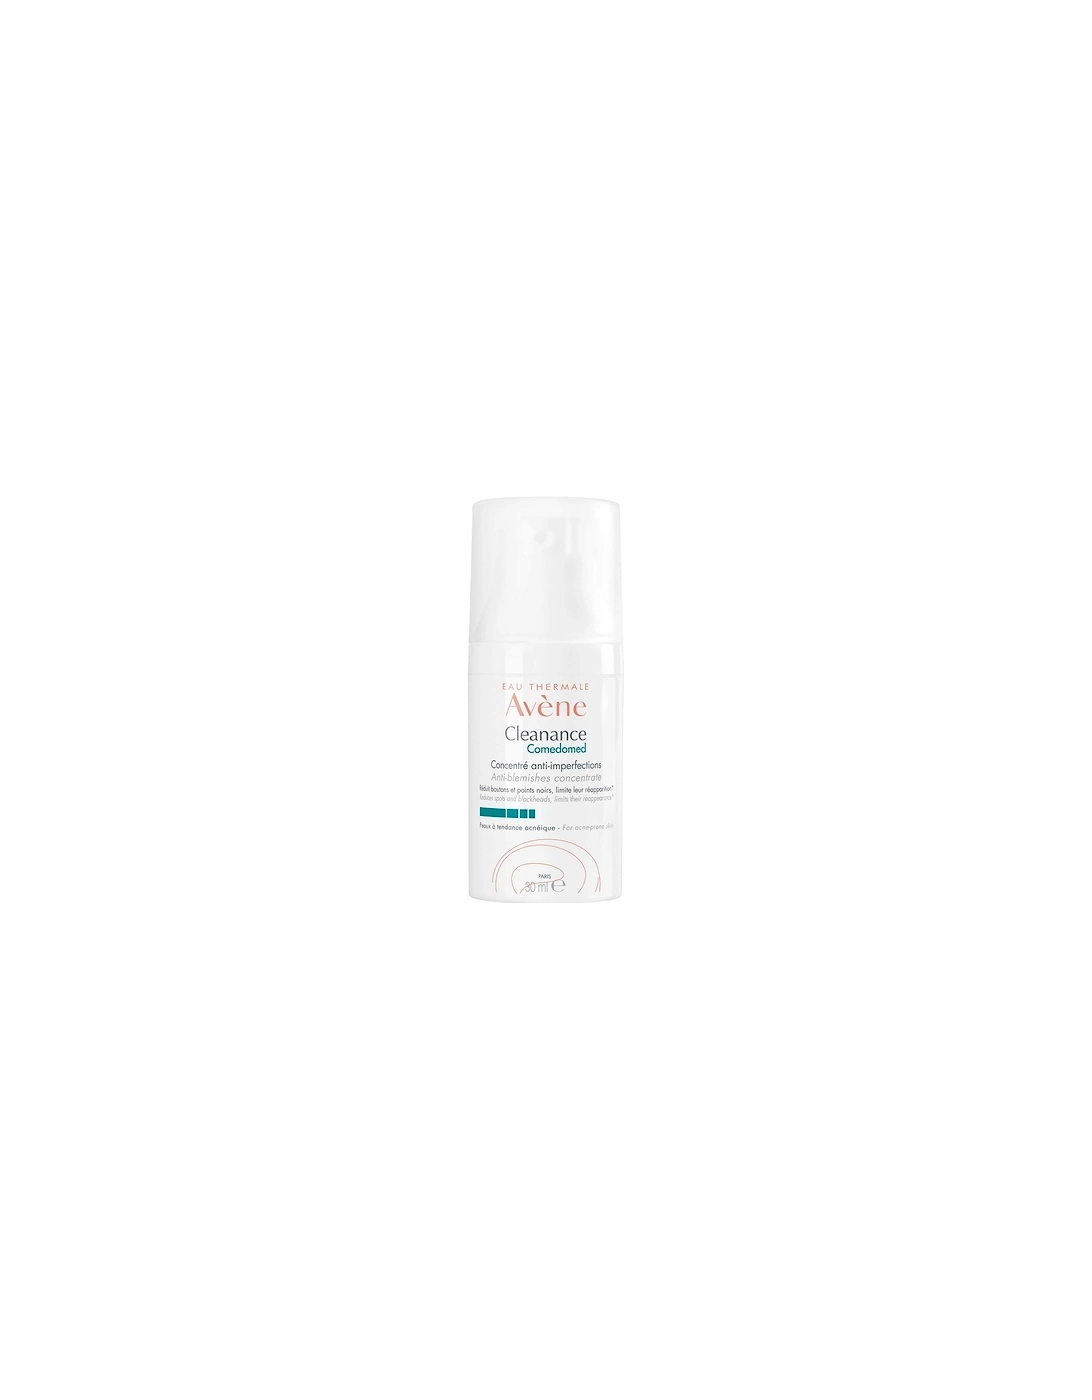 Avène Cleanance Comedomed Anti-Blemish Concentrate Moisturiser for Blemish-Prone Skin 30ml, 2 of 1